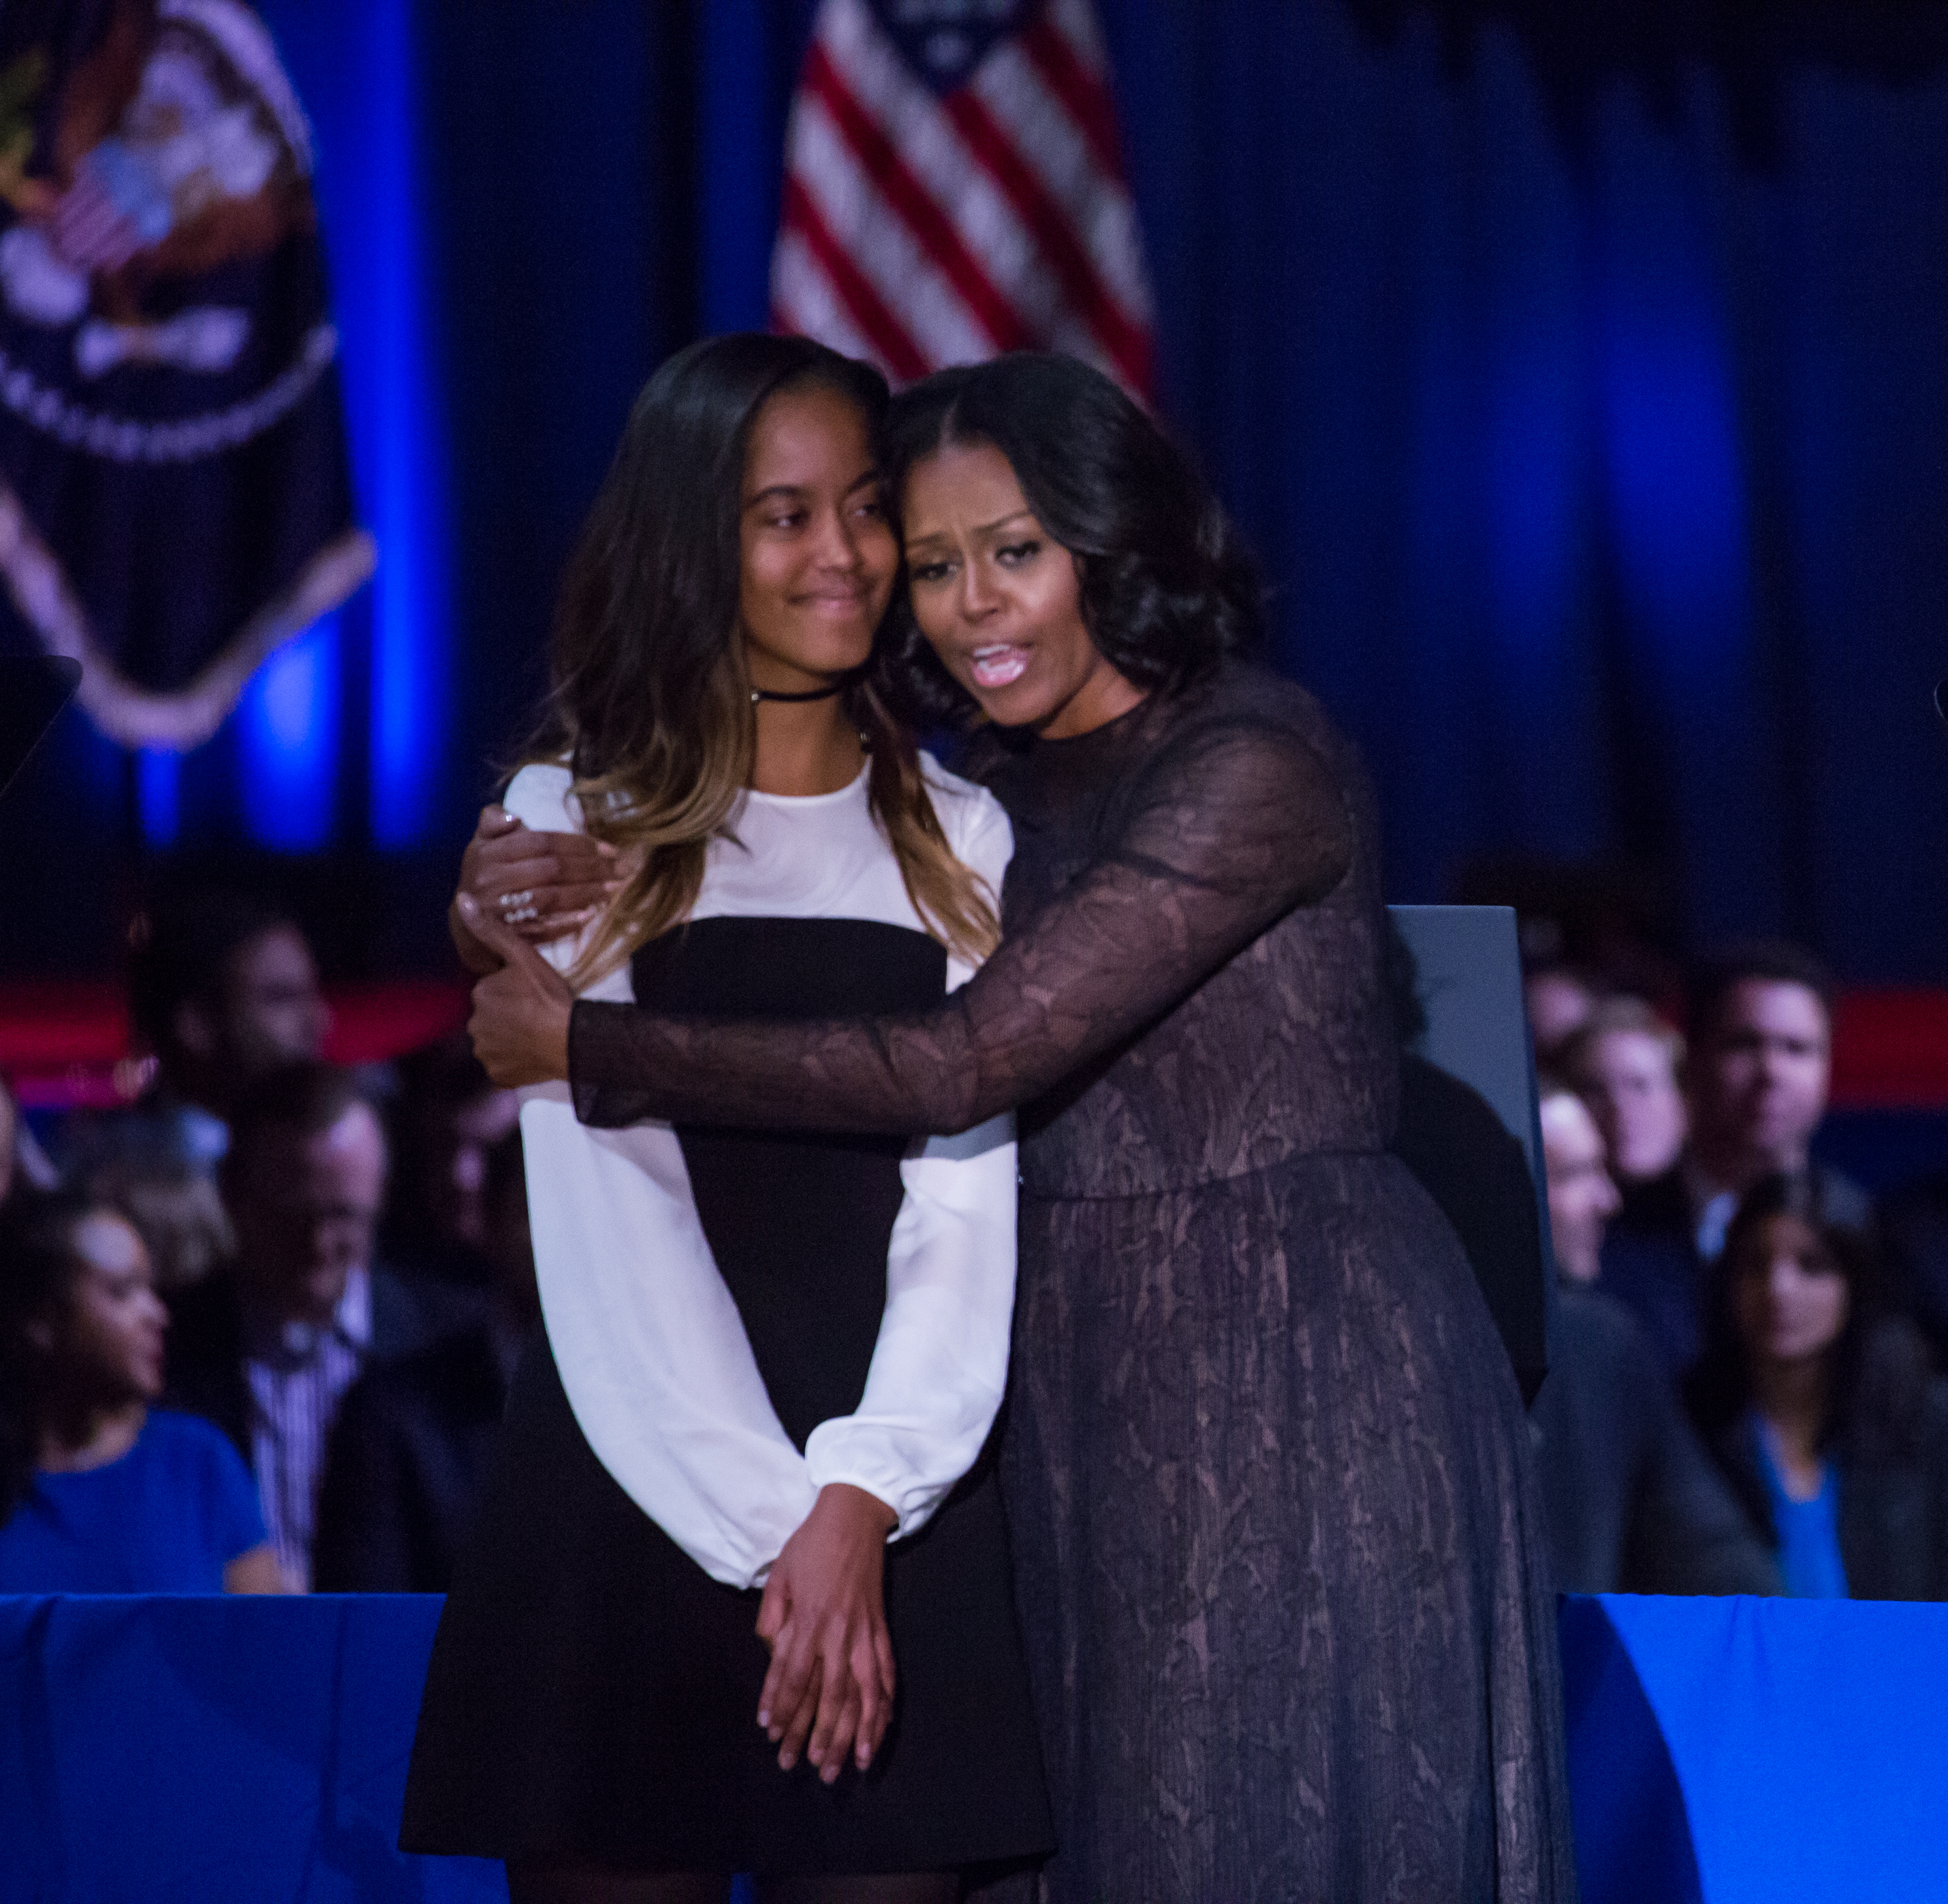 Malia and Michelle Obama at former President Barack Obama's farewell address to the American people in Chicago, Illinois on January 10, 2017 | Source: Getty Images